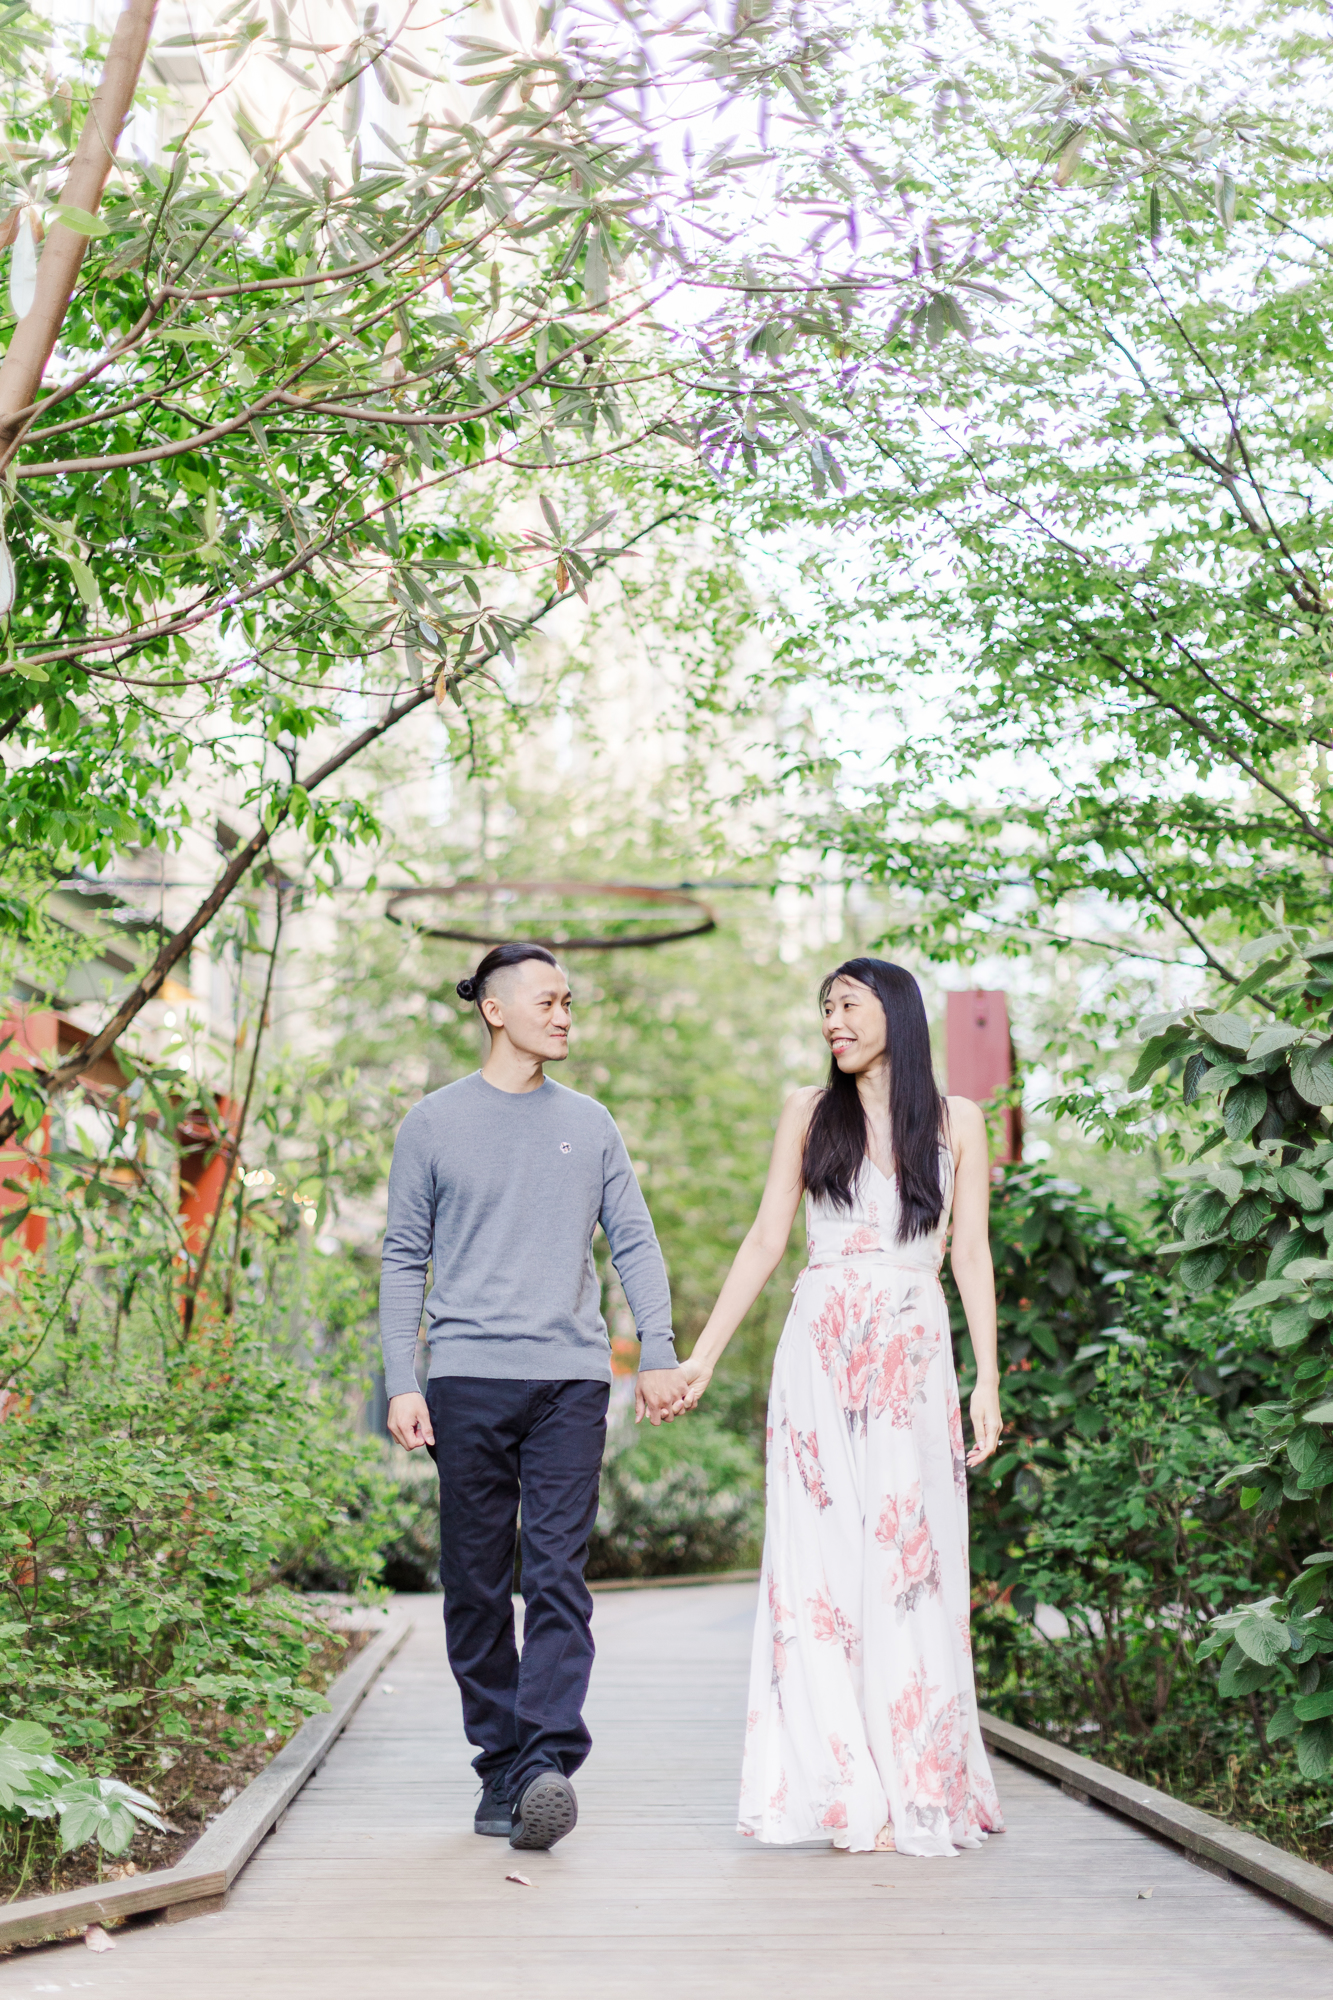 Perfect Brooklyn Engagement Photos in Industry City